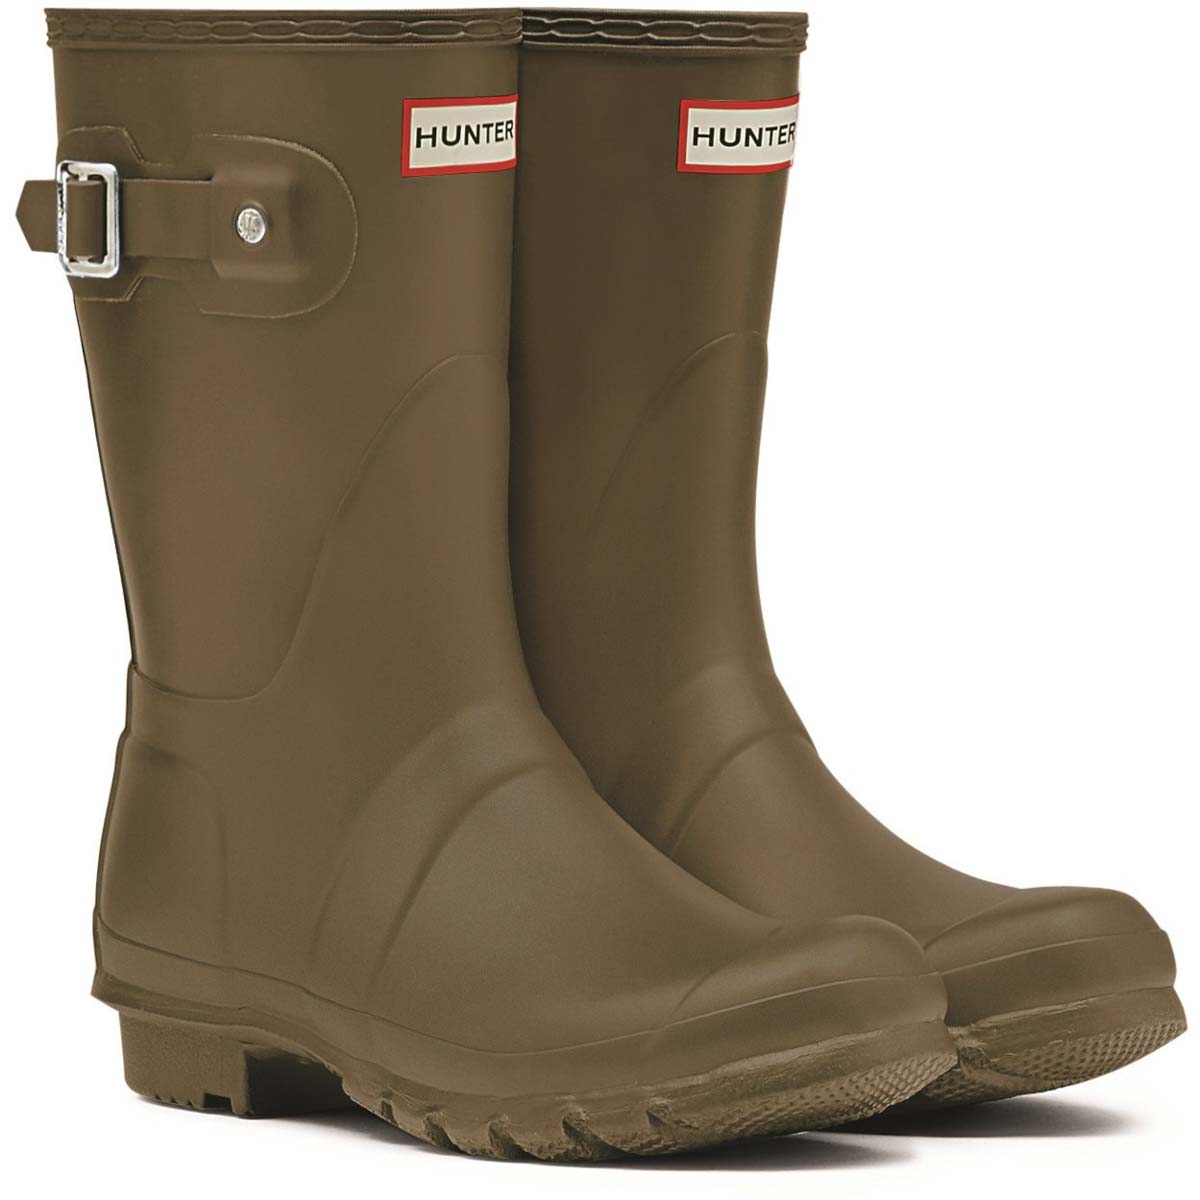 Hunter Original Short Olive Green Womens Wellingtons WFS1000RMA in a Plain Man-made in Size 4